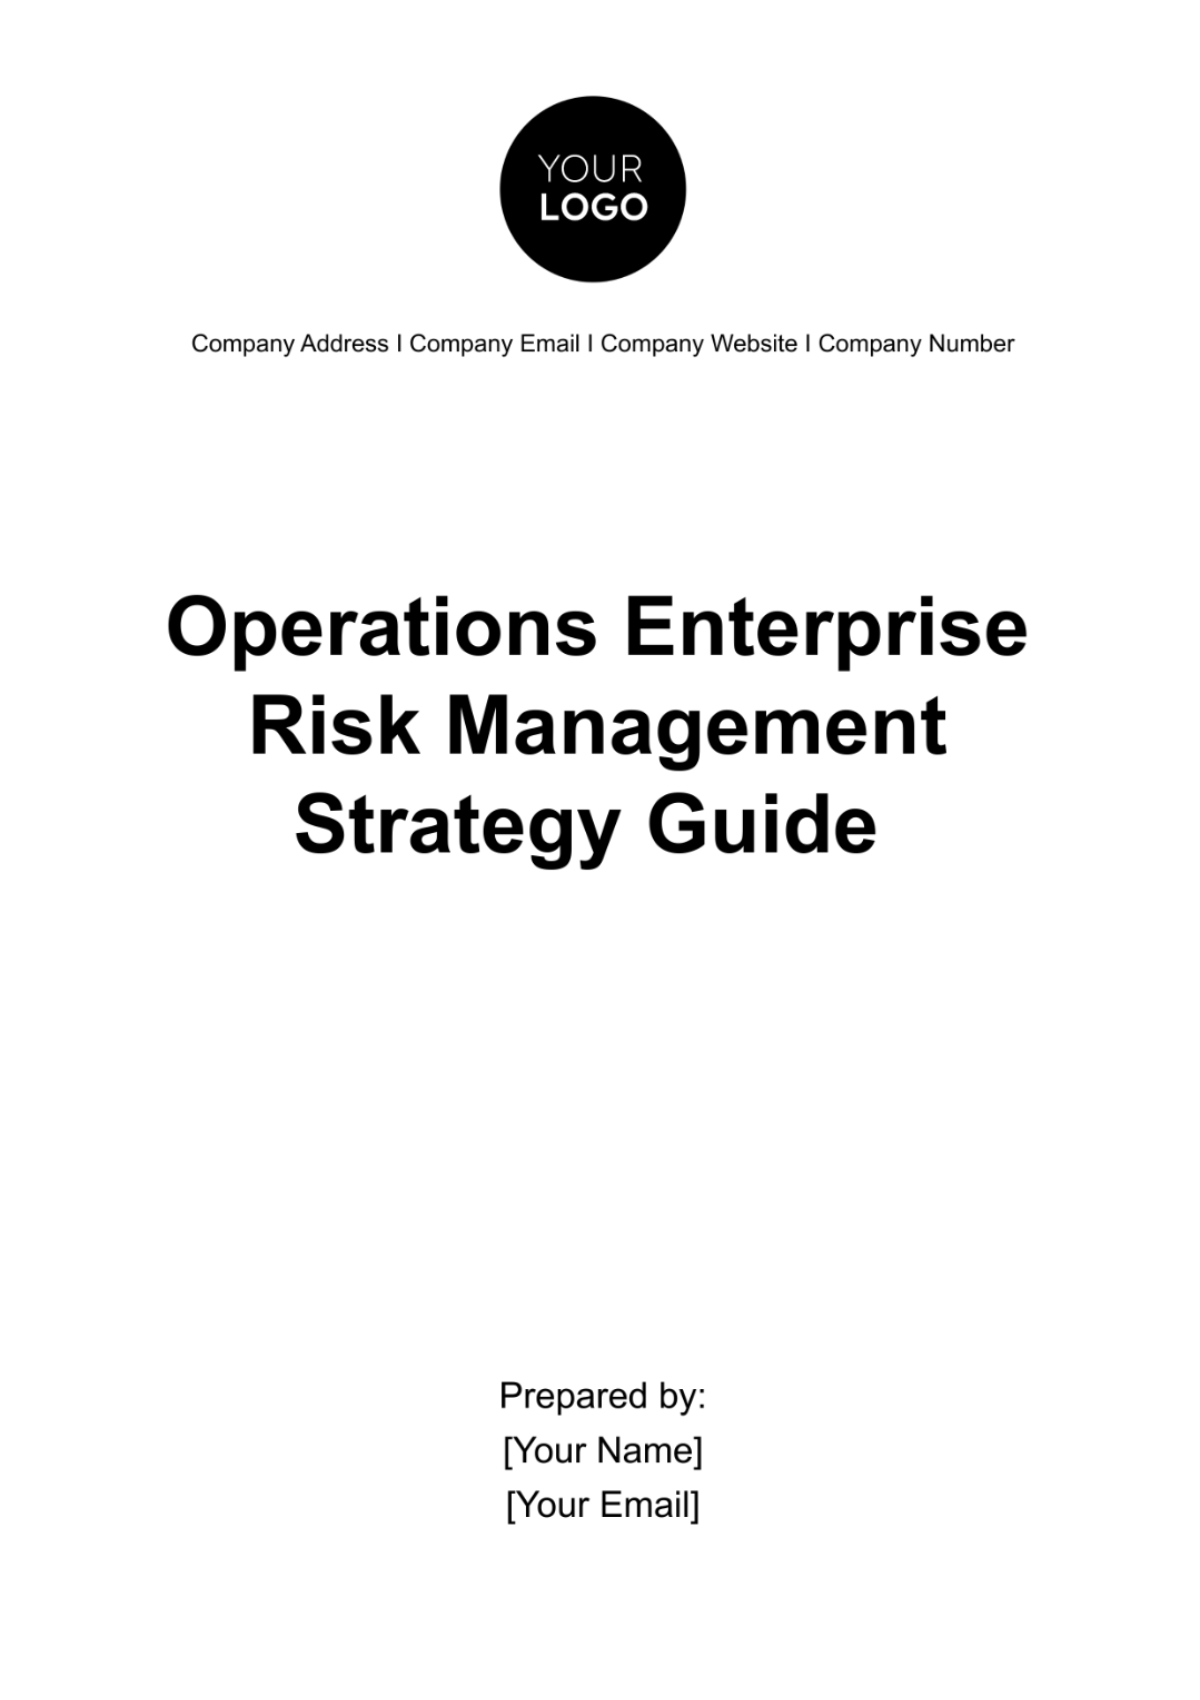 Operations Enterprise Risk Management Strategy Guide Template